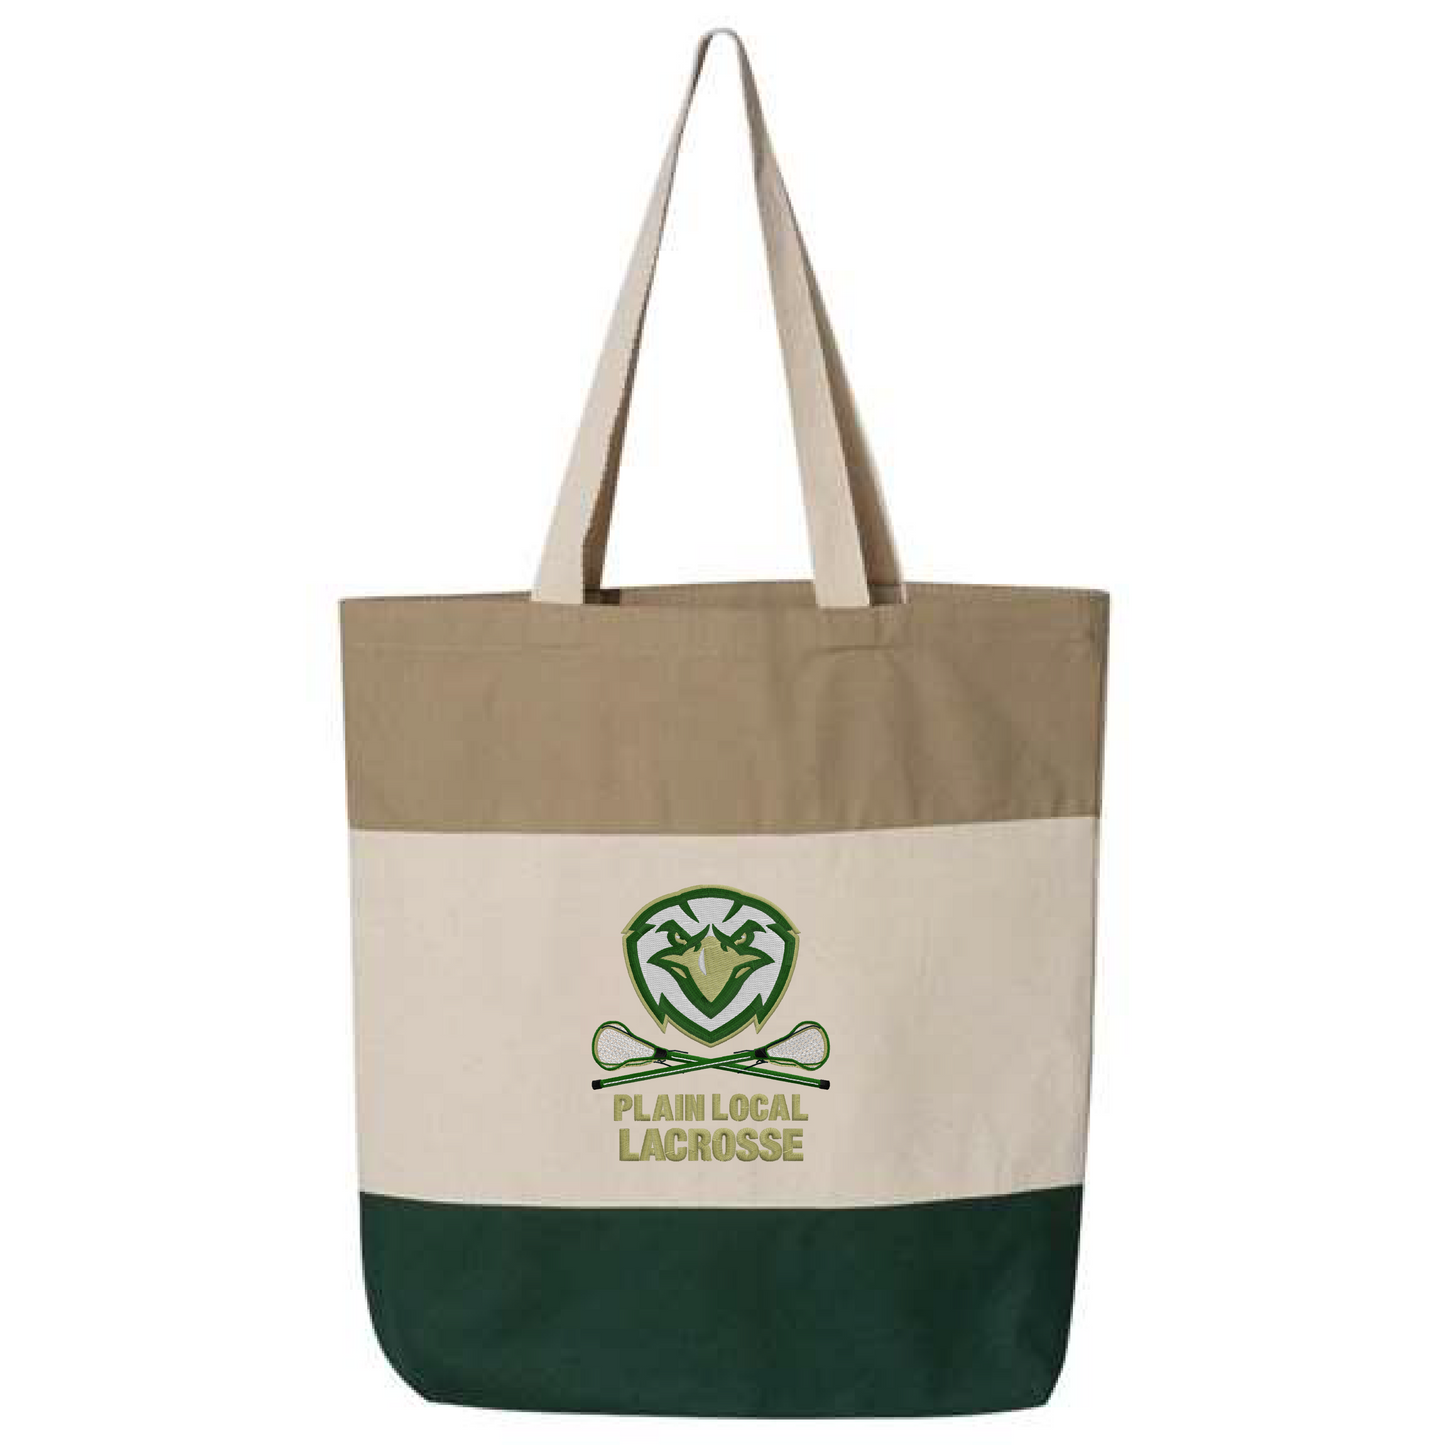 Plain Local Youth Lacrosse Tote Bag